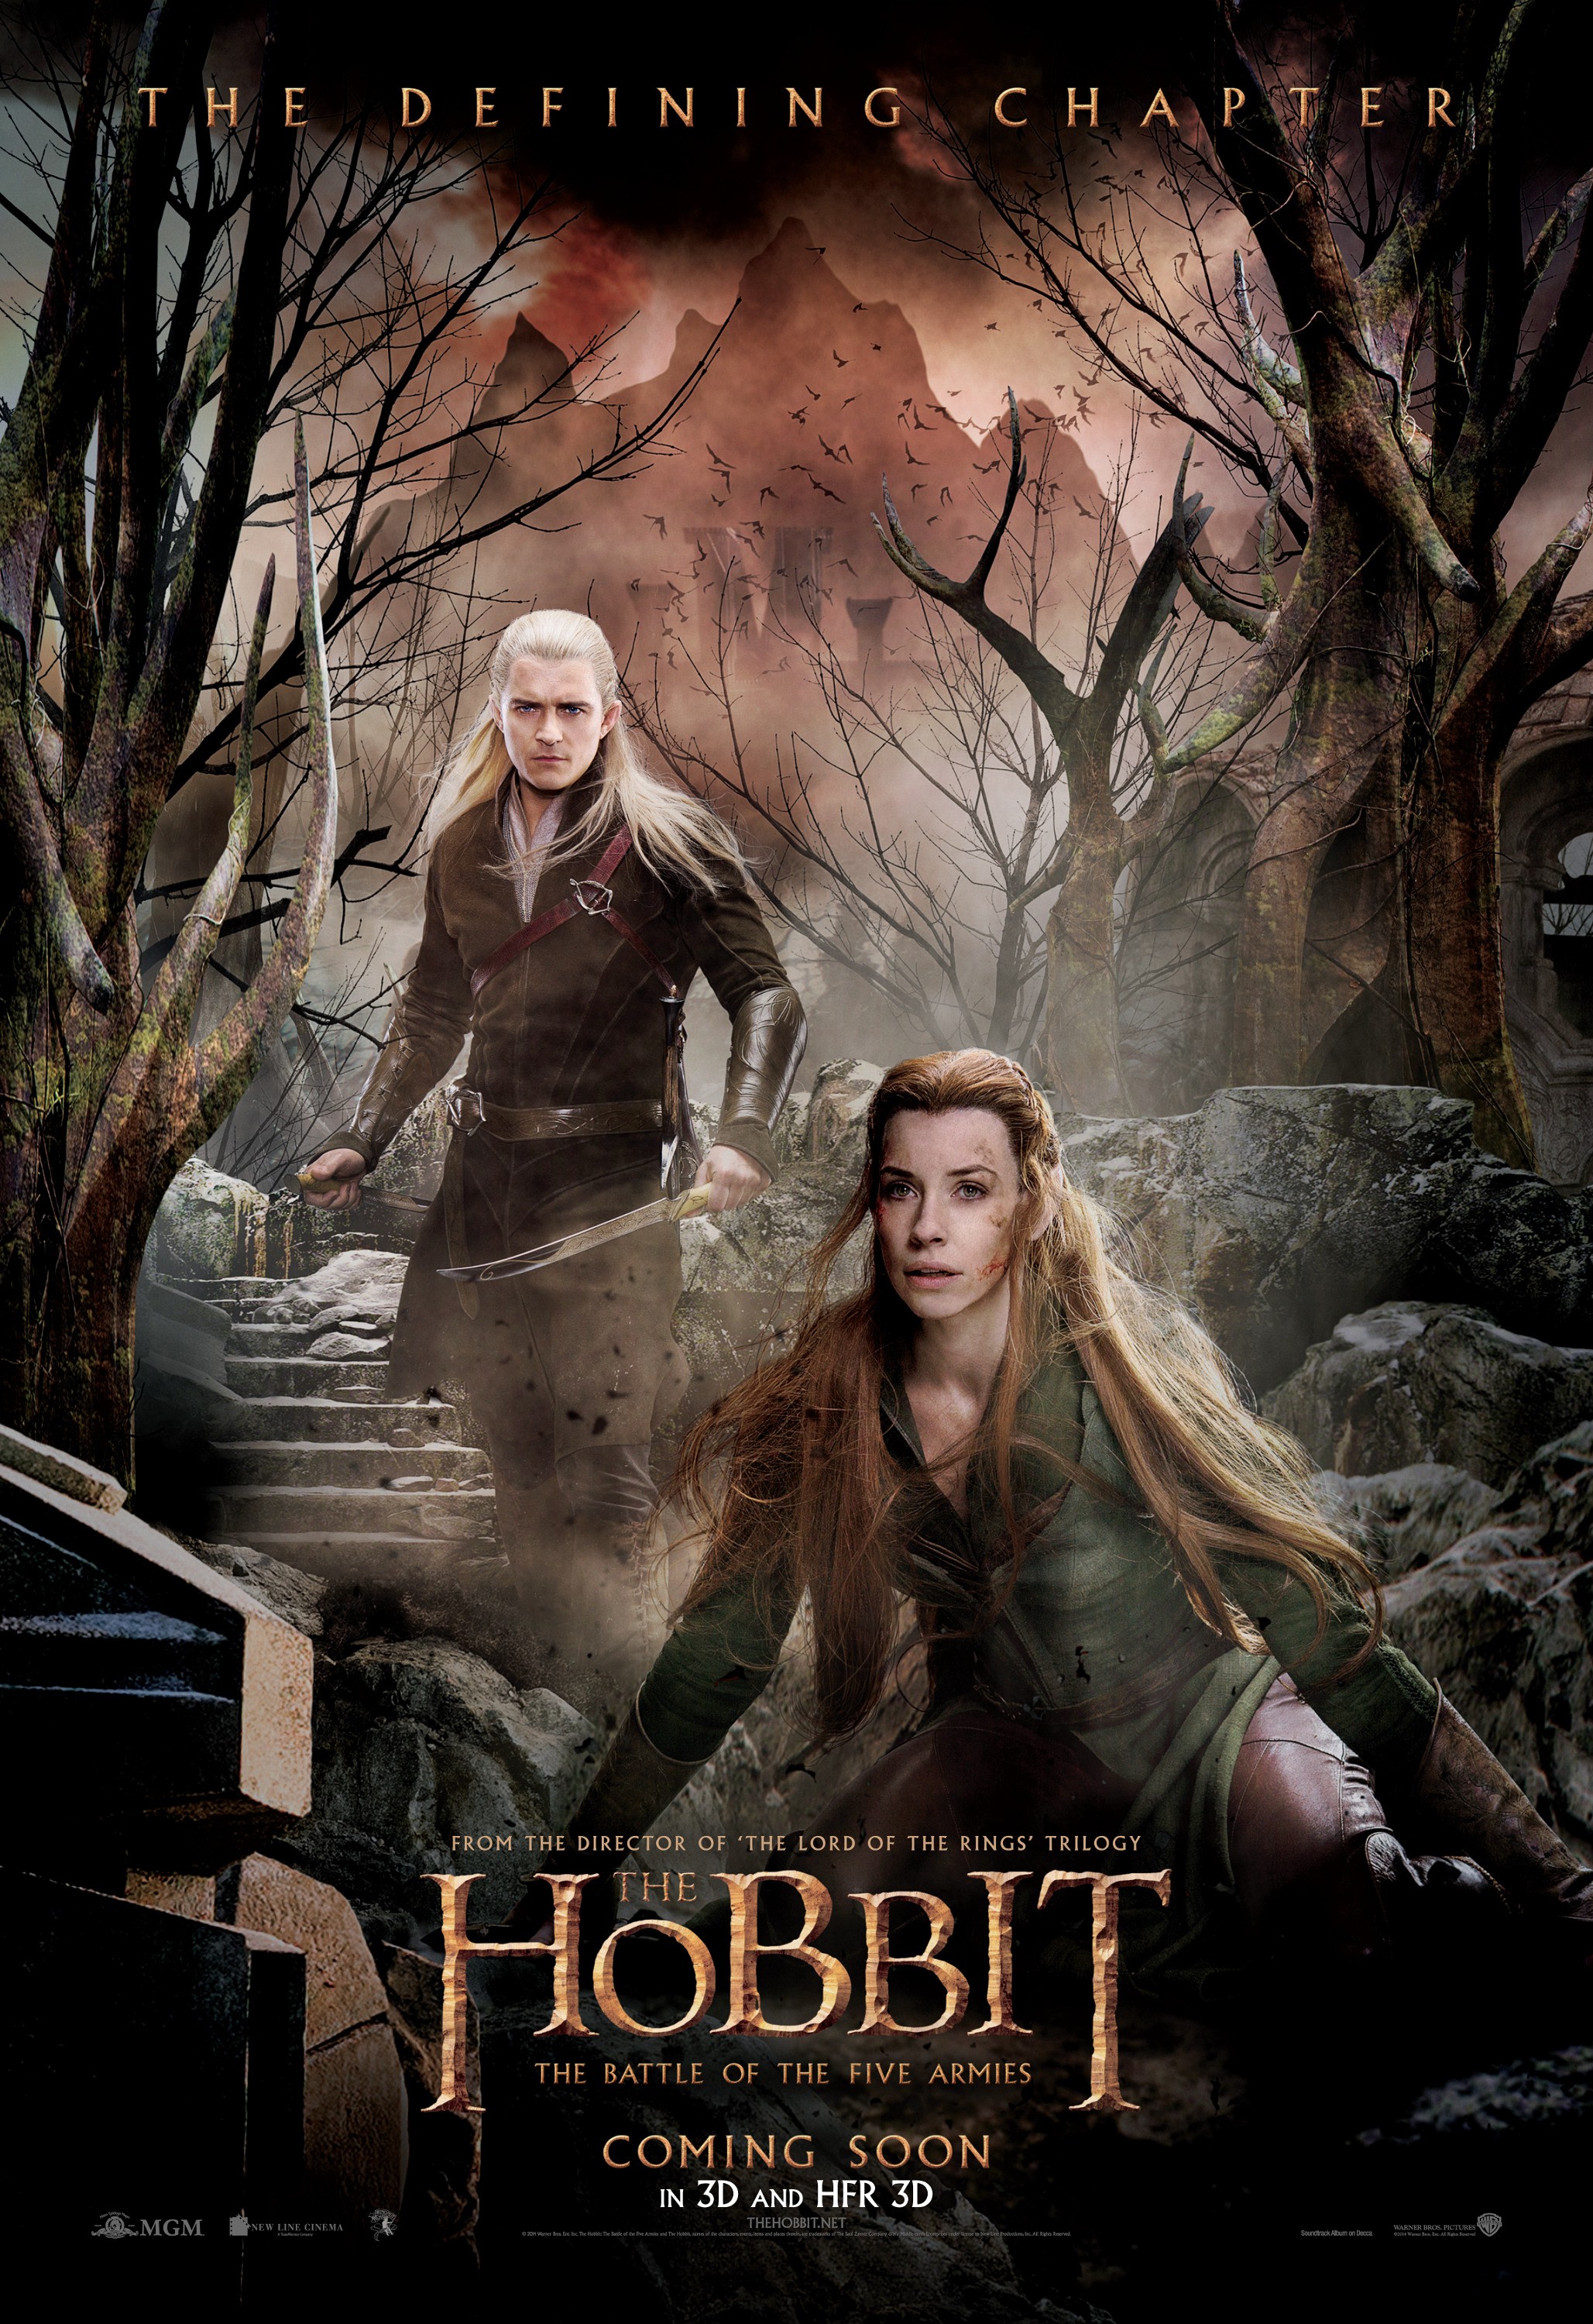 download the new for apple The Hobbit: The Battle of the Five Ar